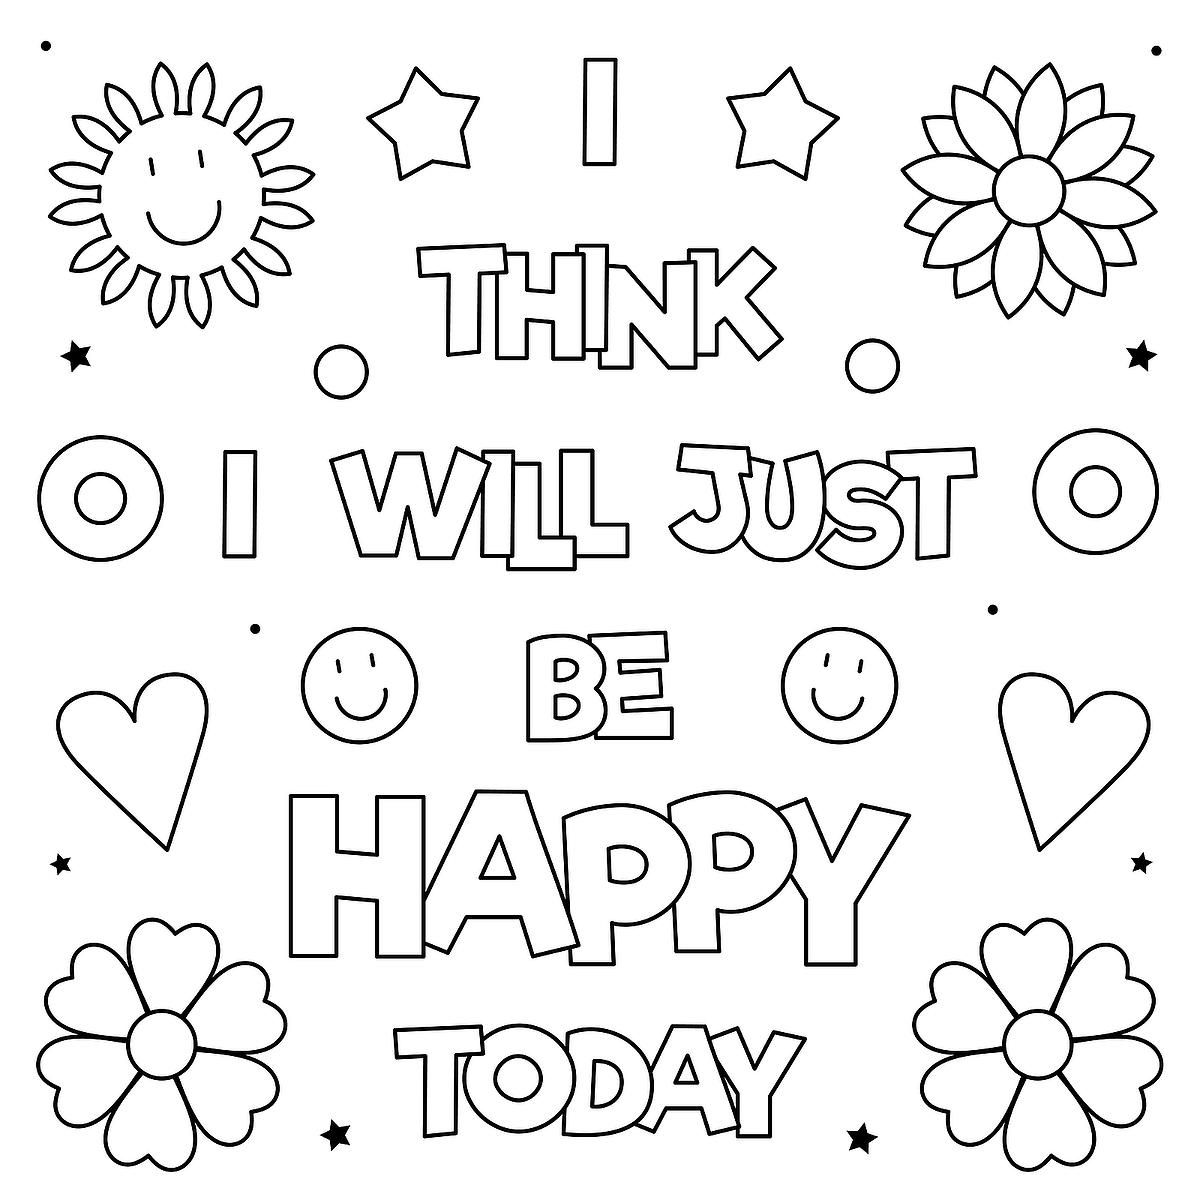 Inspirational coloring pages free printable coloring pages to inspire uplift printables seconds mom free printable coloring pages free printable coloring coloring pages inspirational